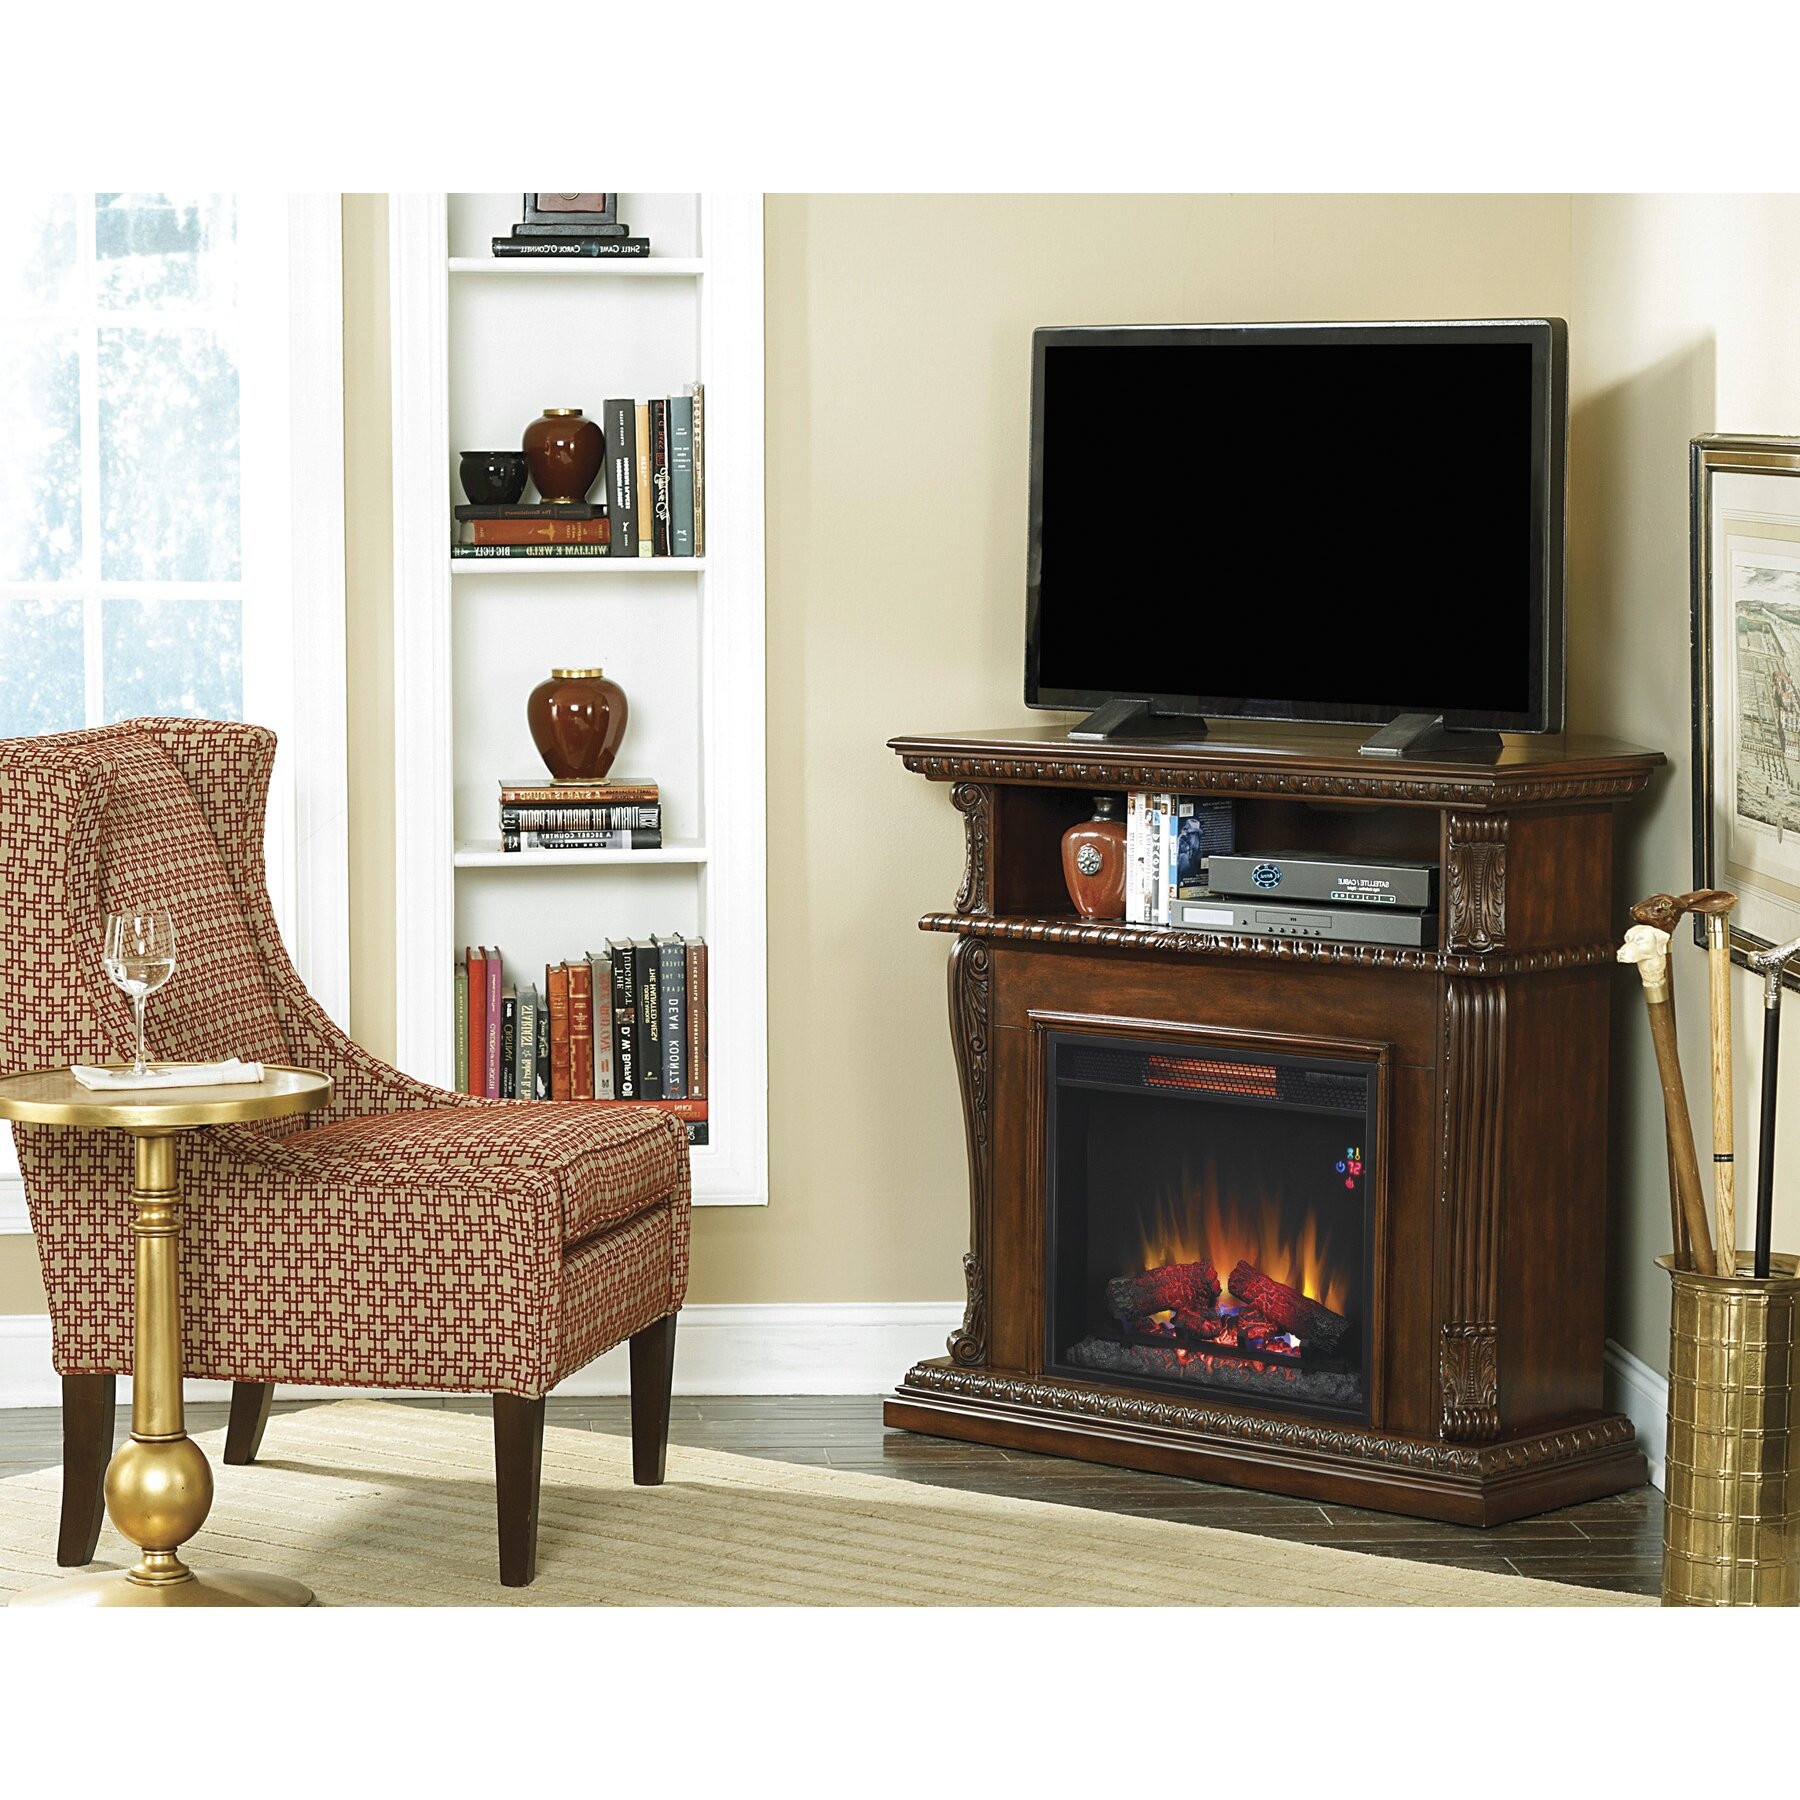 Classic Flame Electric Fireplace
 Classic Flame Electric Fireplace Insert & Reviews